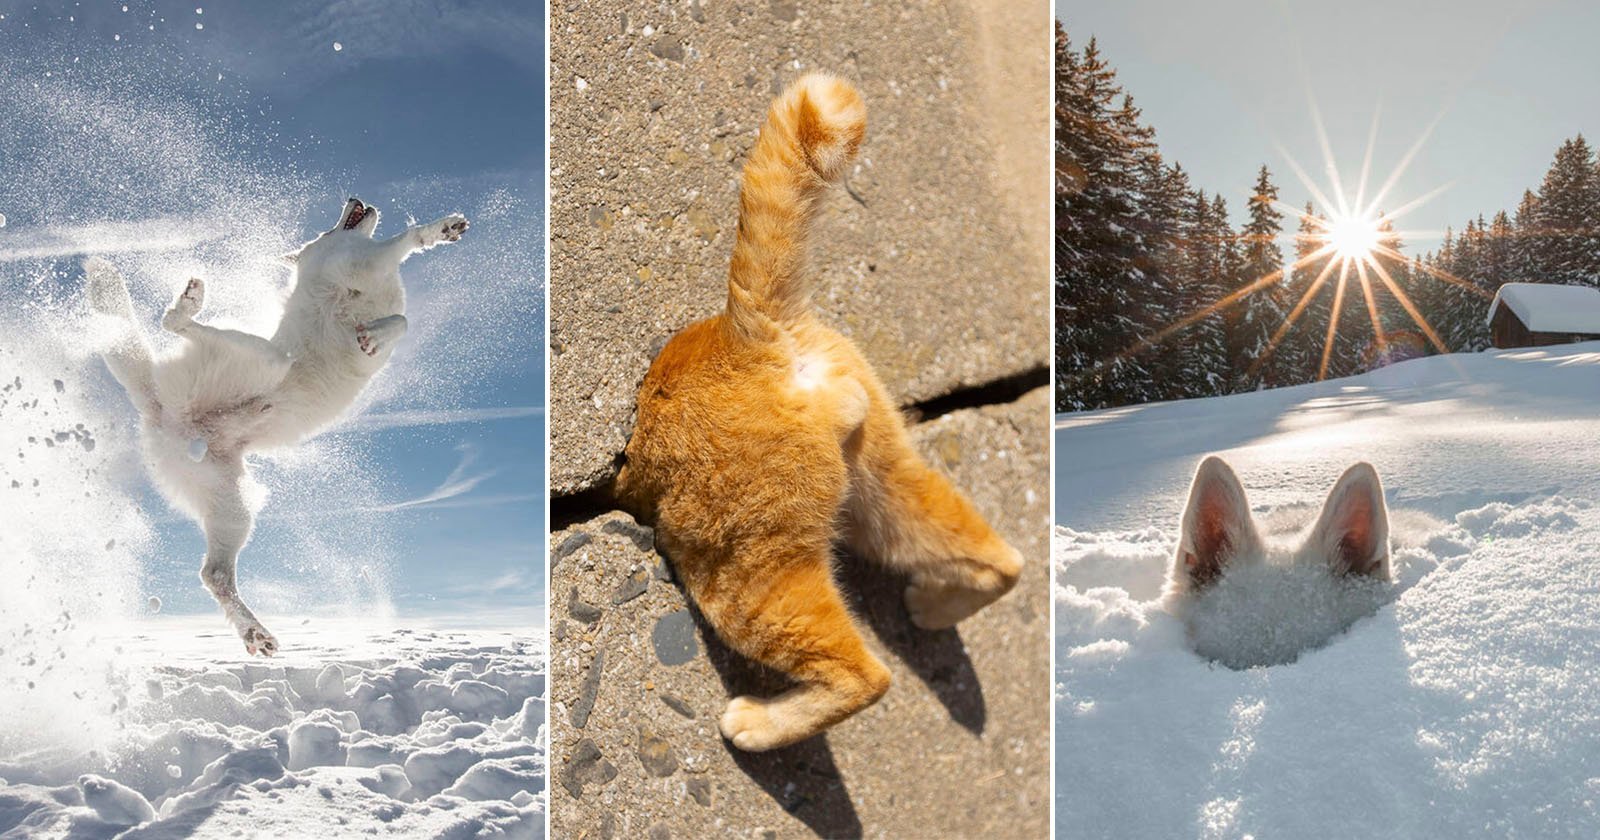  comedy pet photo awards finalists are adorable 